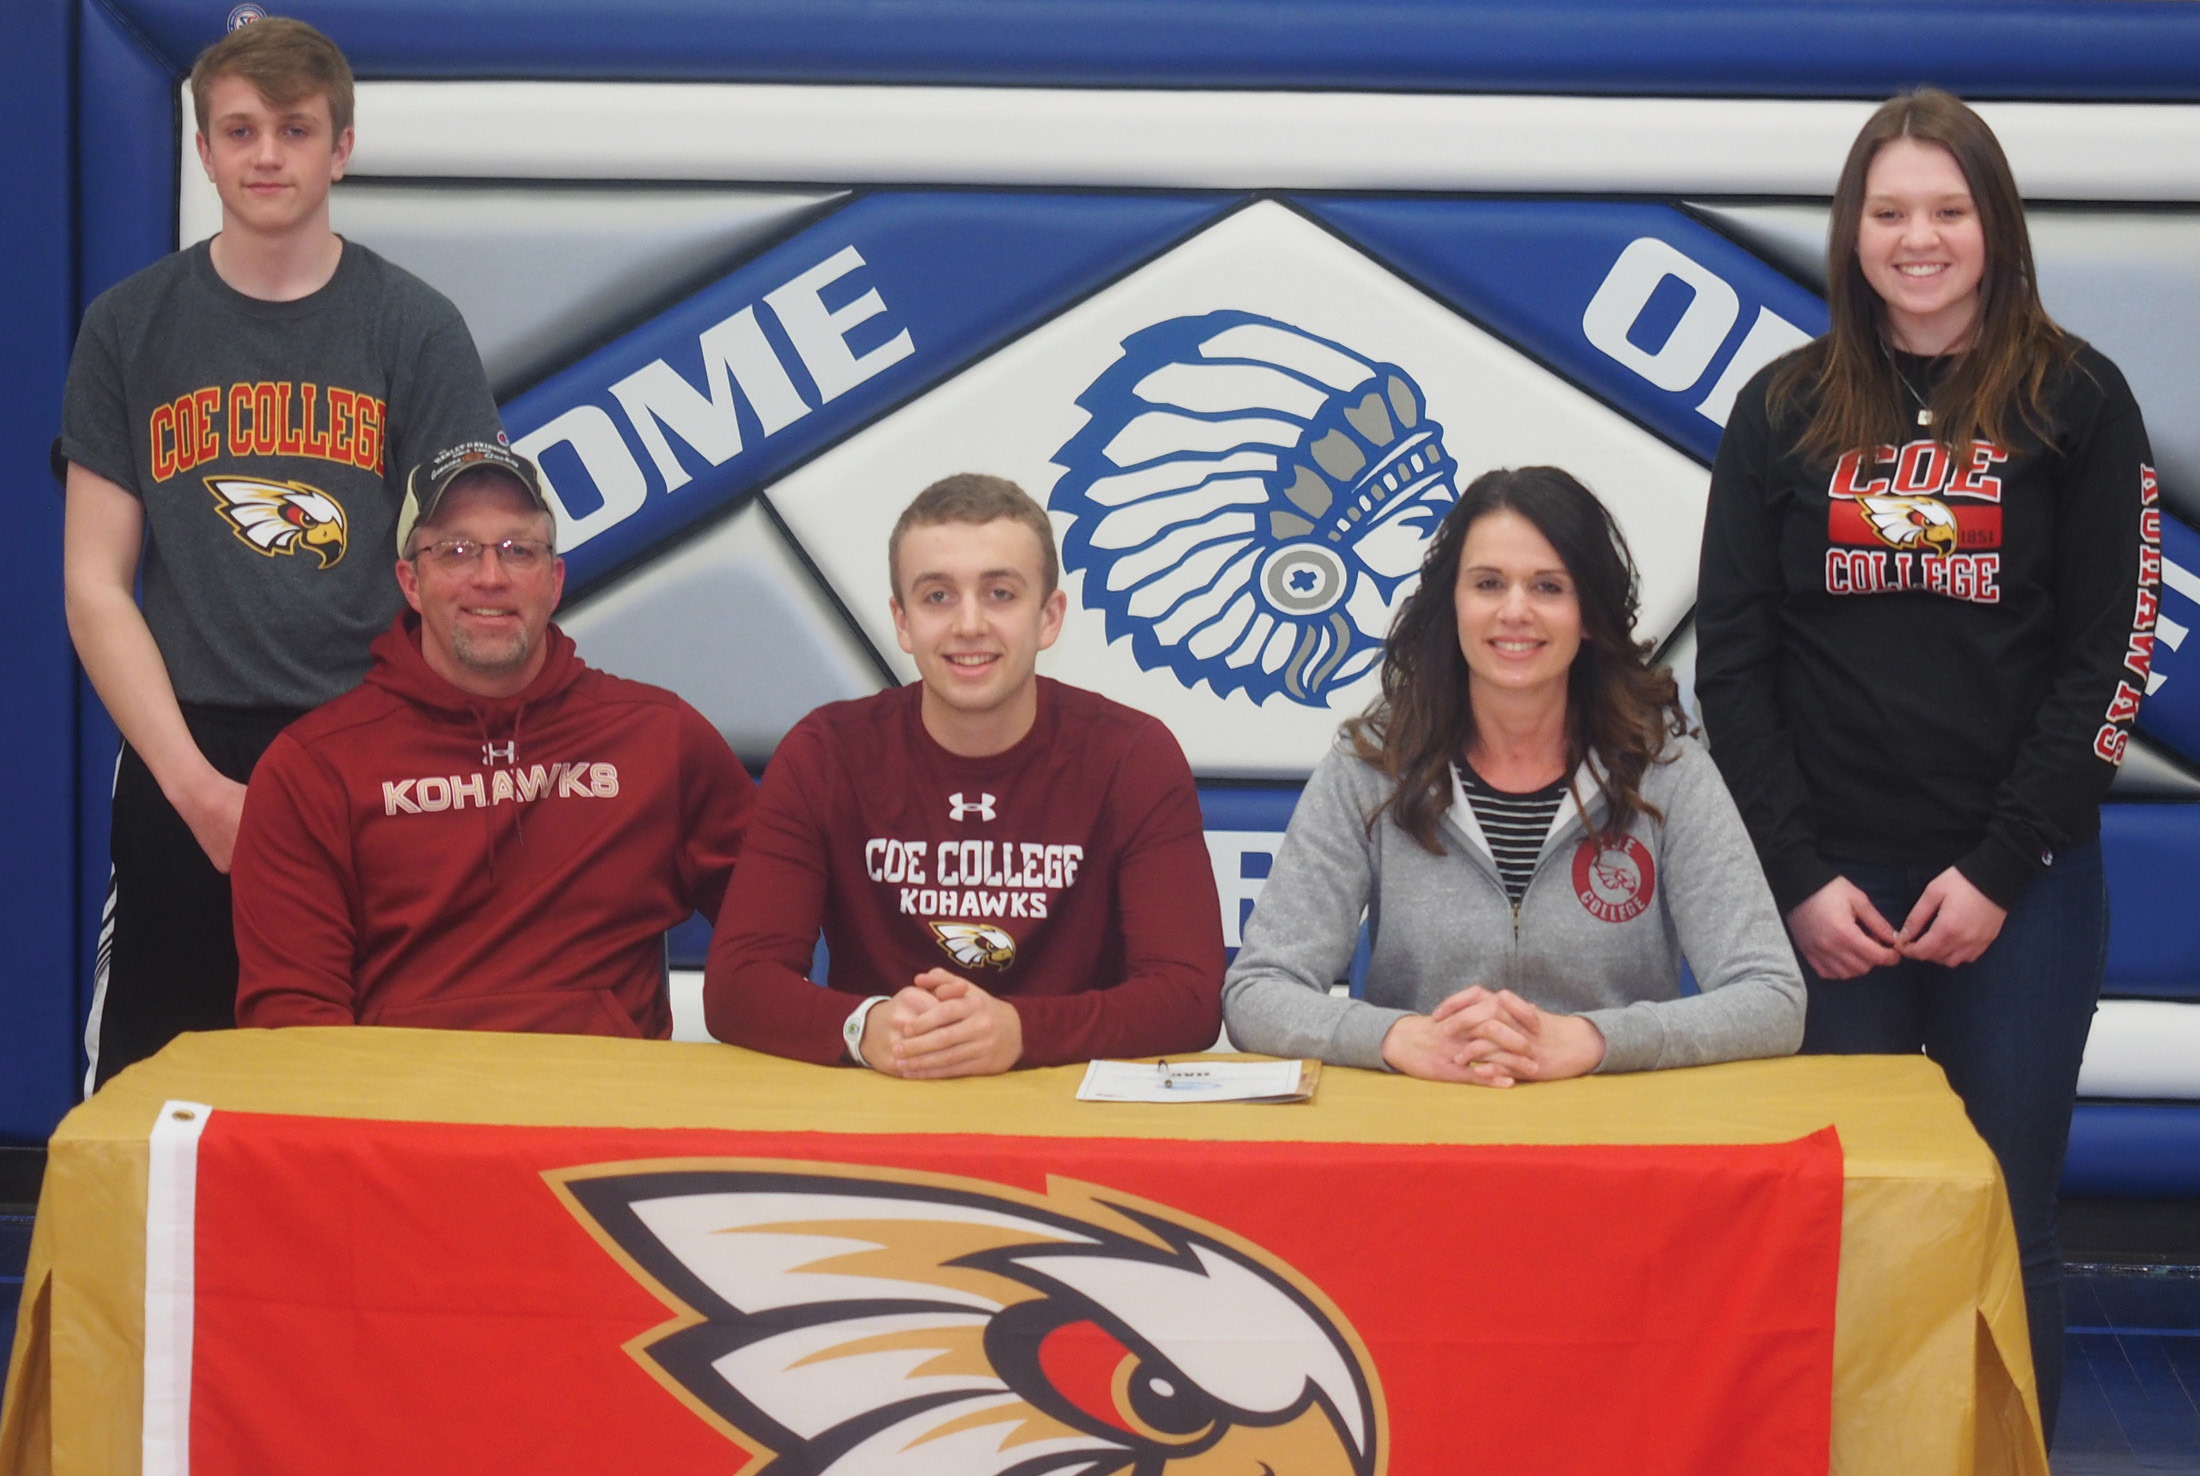 Rockford’s Zach Bushbaum to play basketball for Coe College